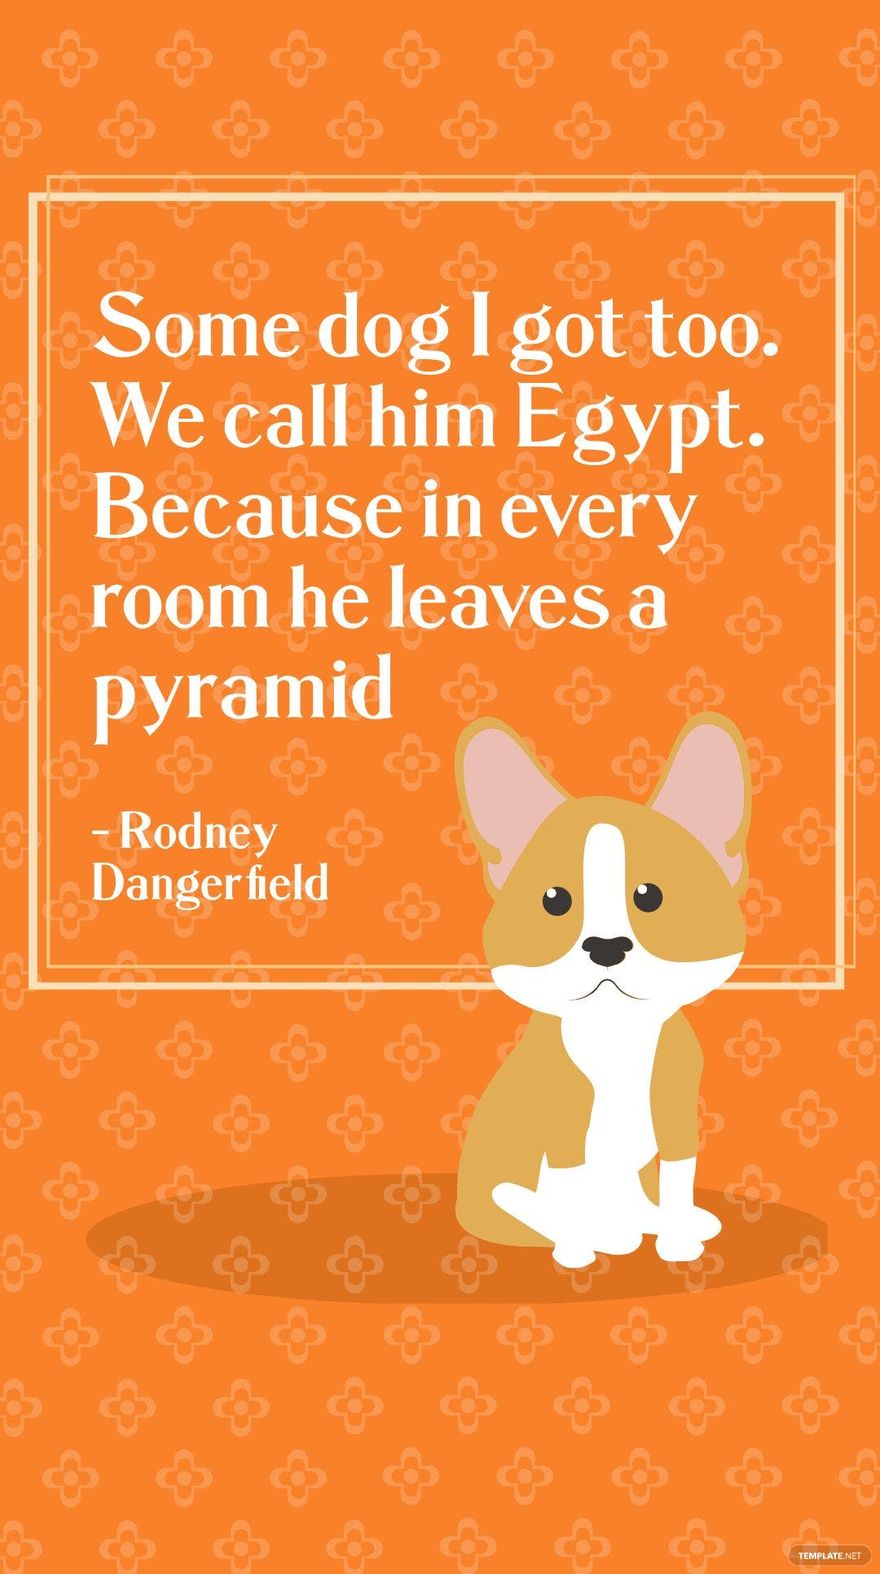 Free Rodney Dangerfield - Some dog I got too. We call him Egypt. Because in every room he leaves a pyramid in JPG